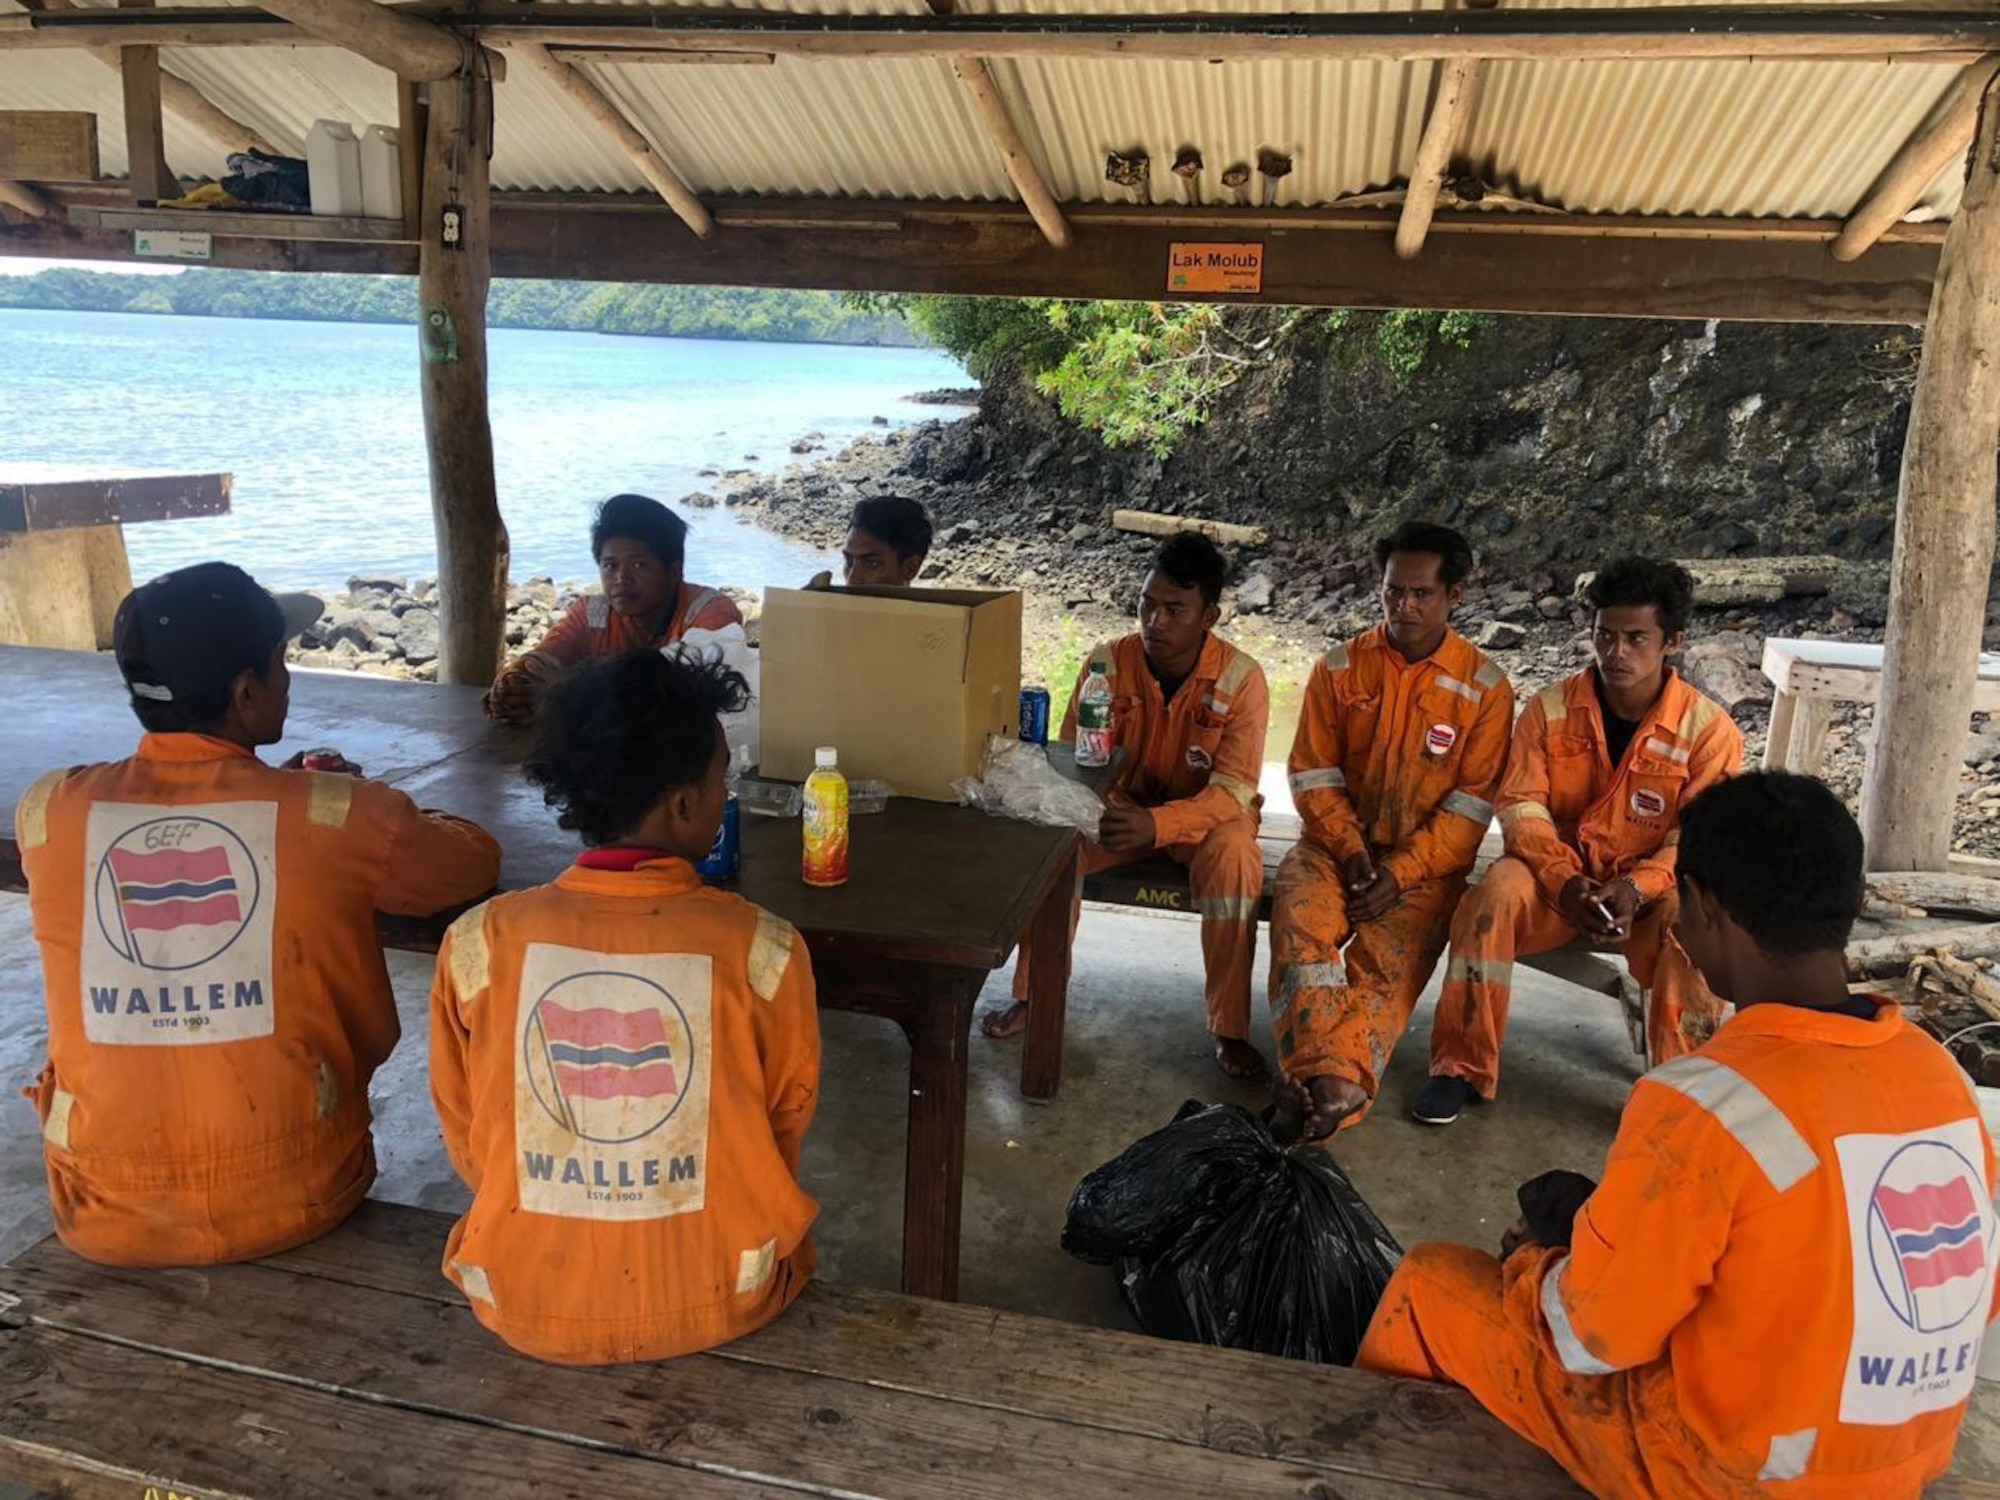 The crew of the Indonesian-flagged vessel KM Aleluya safe in Palau after being rescued by the AMVER vessel Isl Star, Aug. 14, 2019.